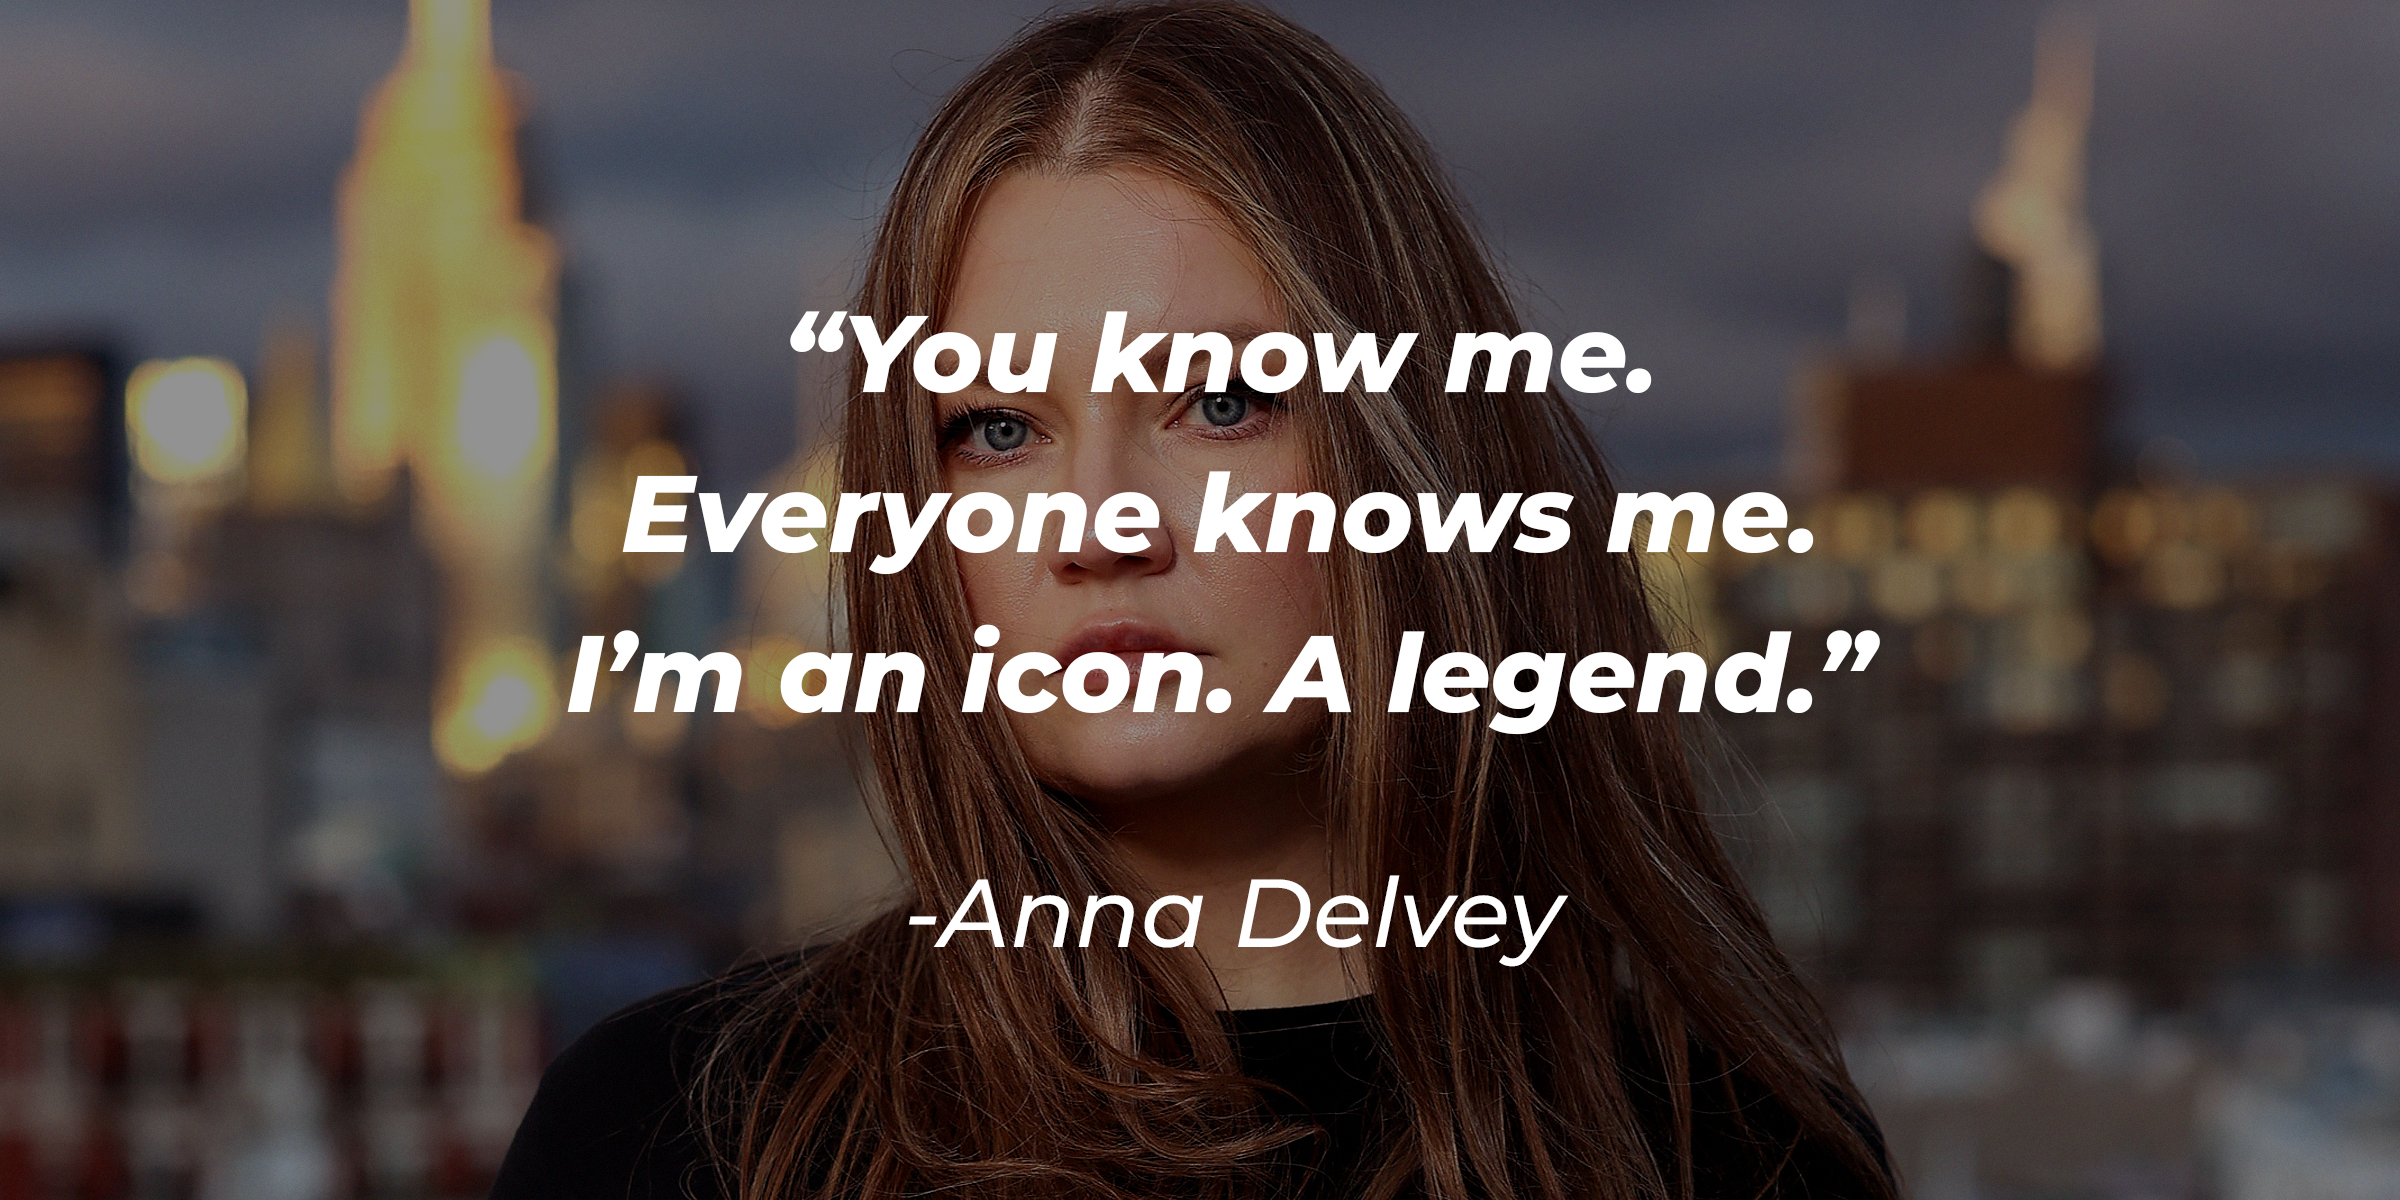 Anna Delvey from "Inventing Anna" with the quote: “You know me. Everyone knows me. I’m an icon. A legend.” | Source: Getty Images